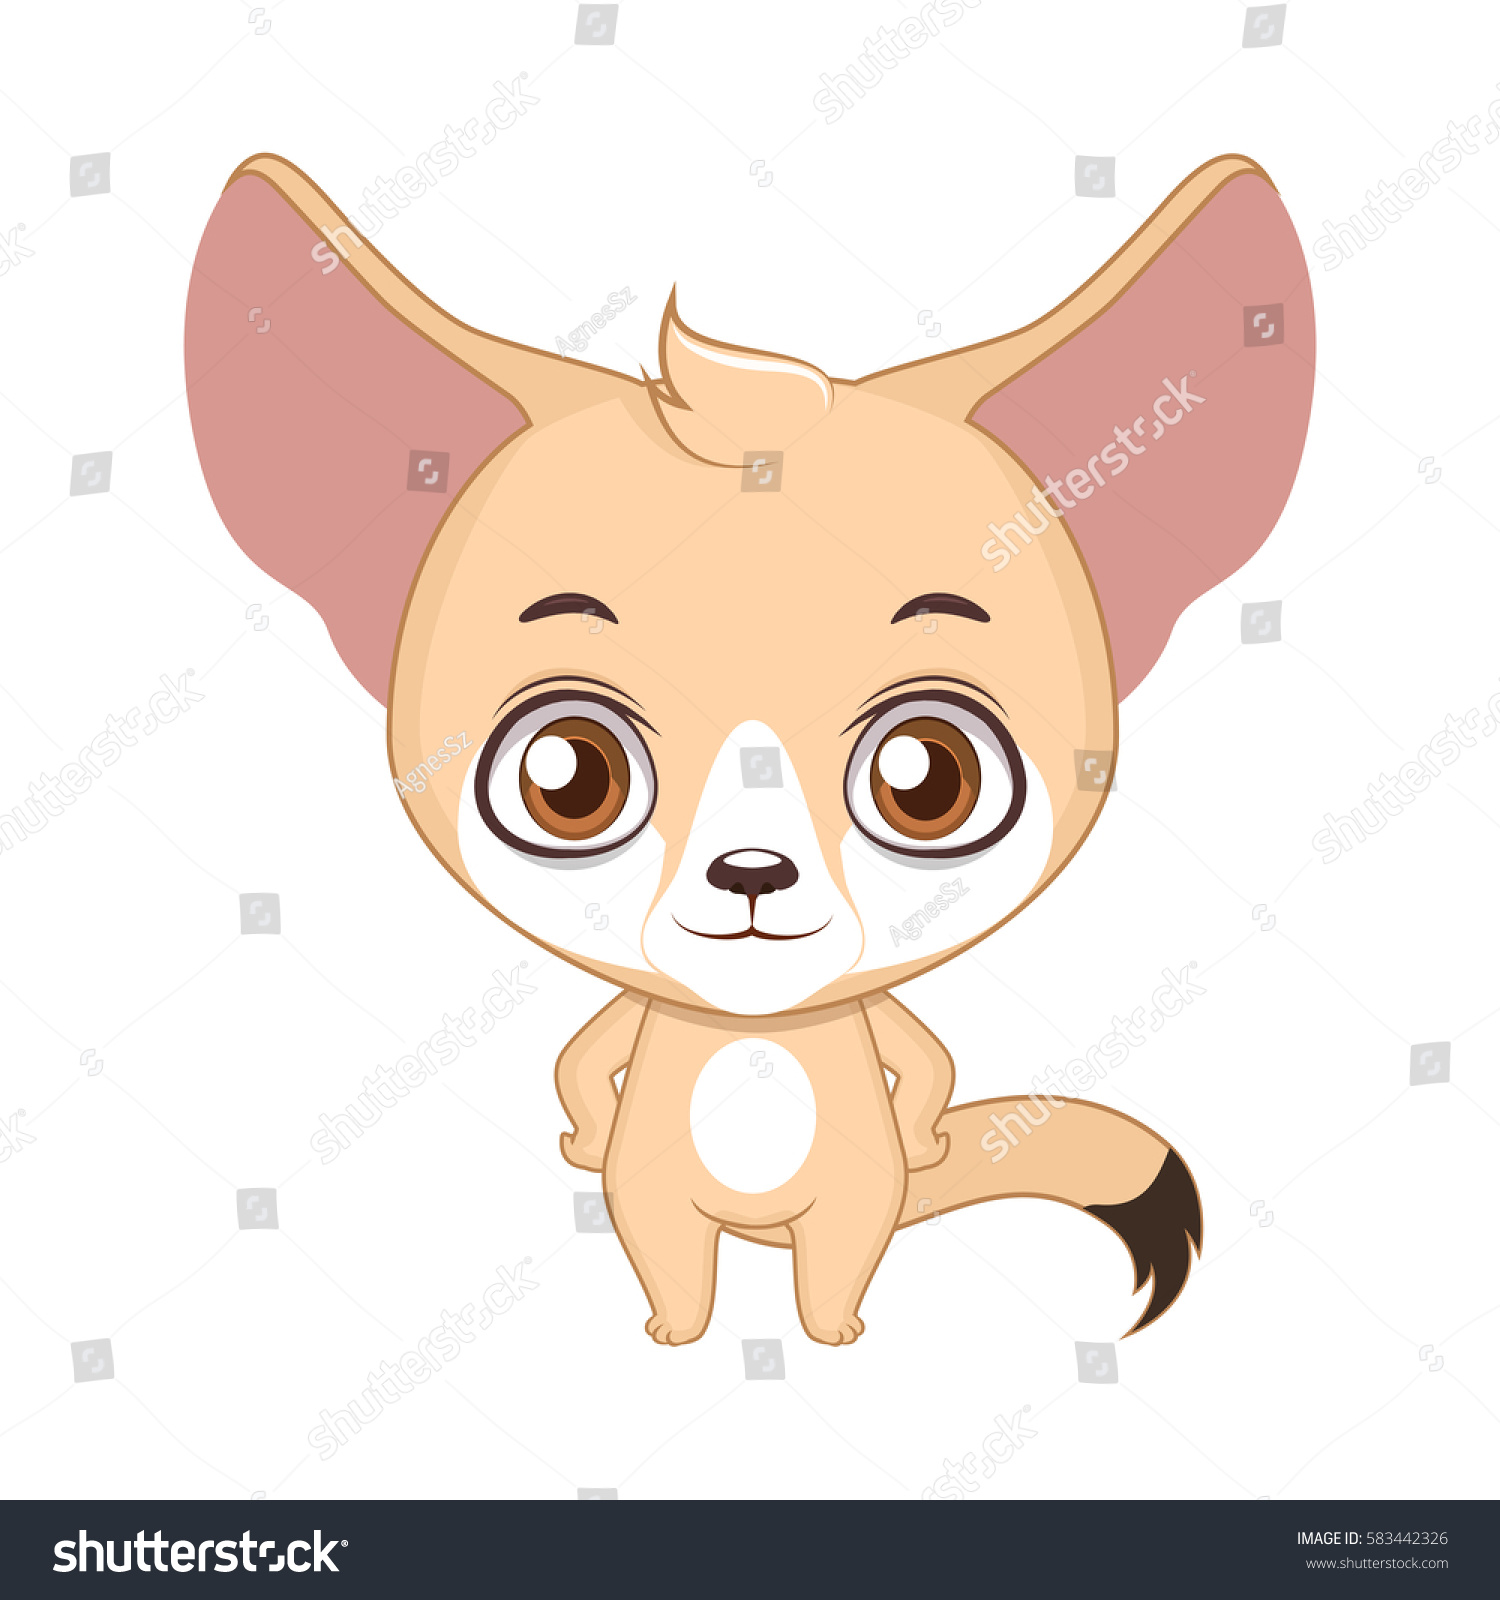 Cute Stylized Cartoon Fennec Fox Illustration Stock Vector Royalty Free 583442326 Fennec foxes are the smallest of the canids and live in deserts and arid regions of africa and fennec fox. https www shutterstock com image vector cute stylized cartoon fennec fox illustration 583442326